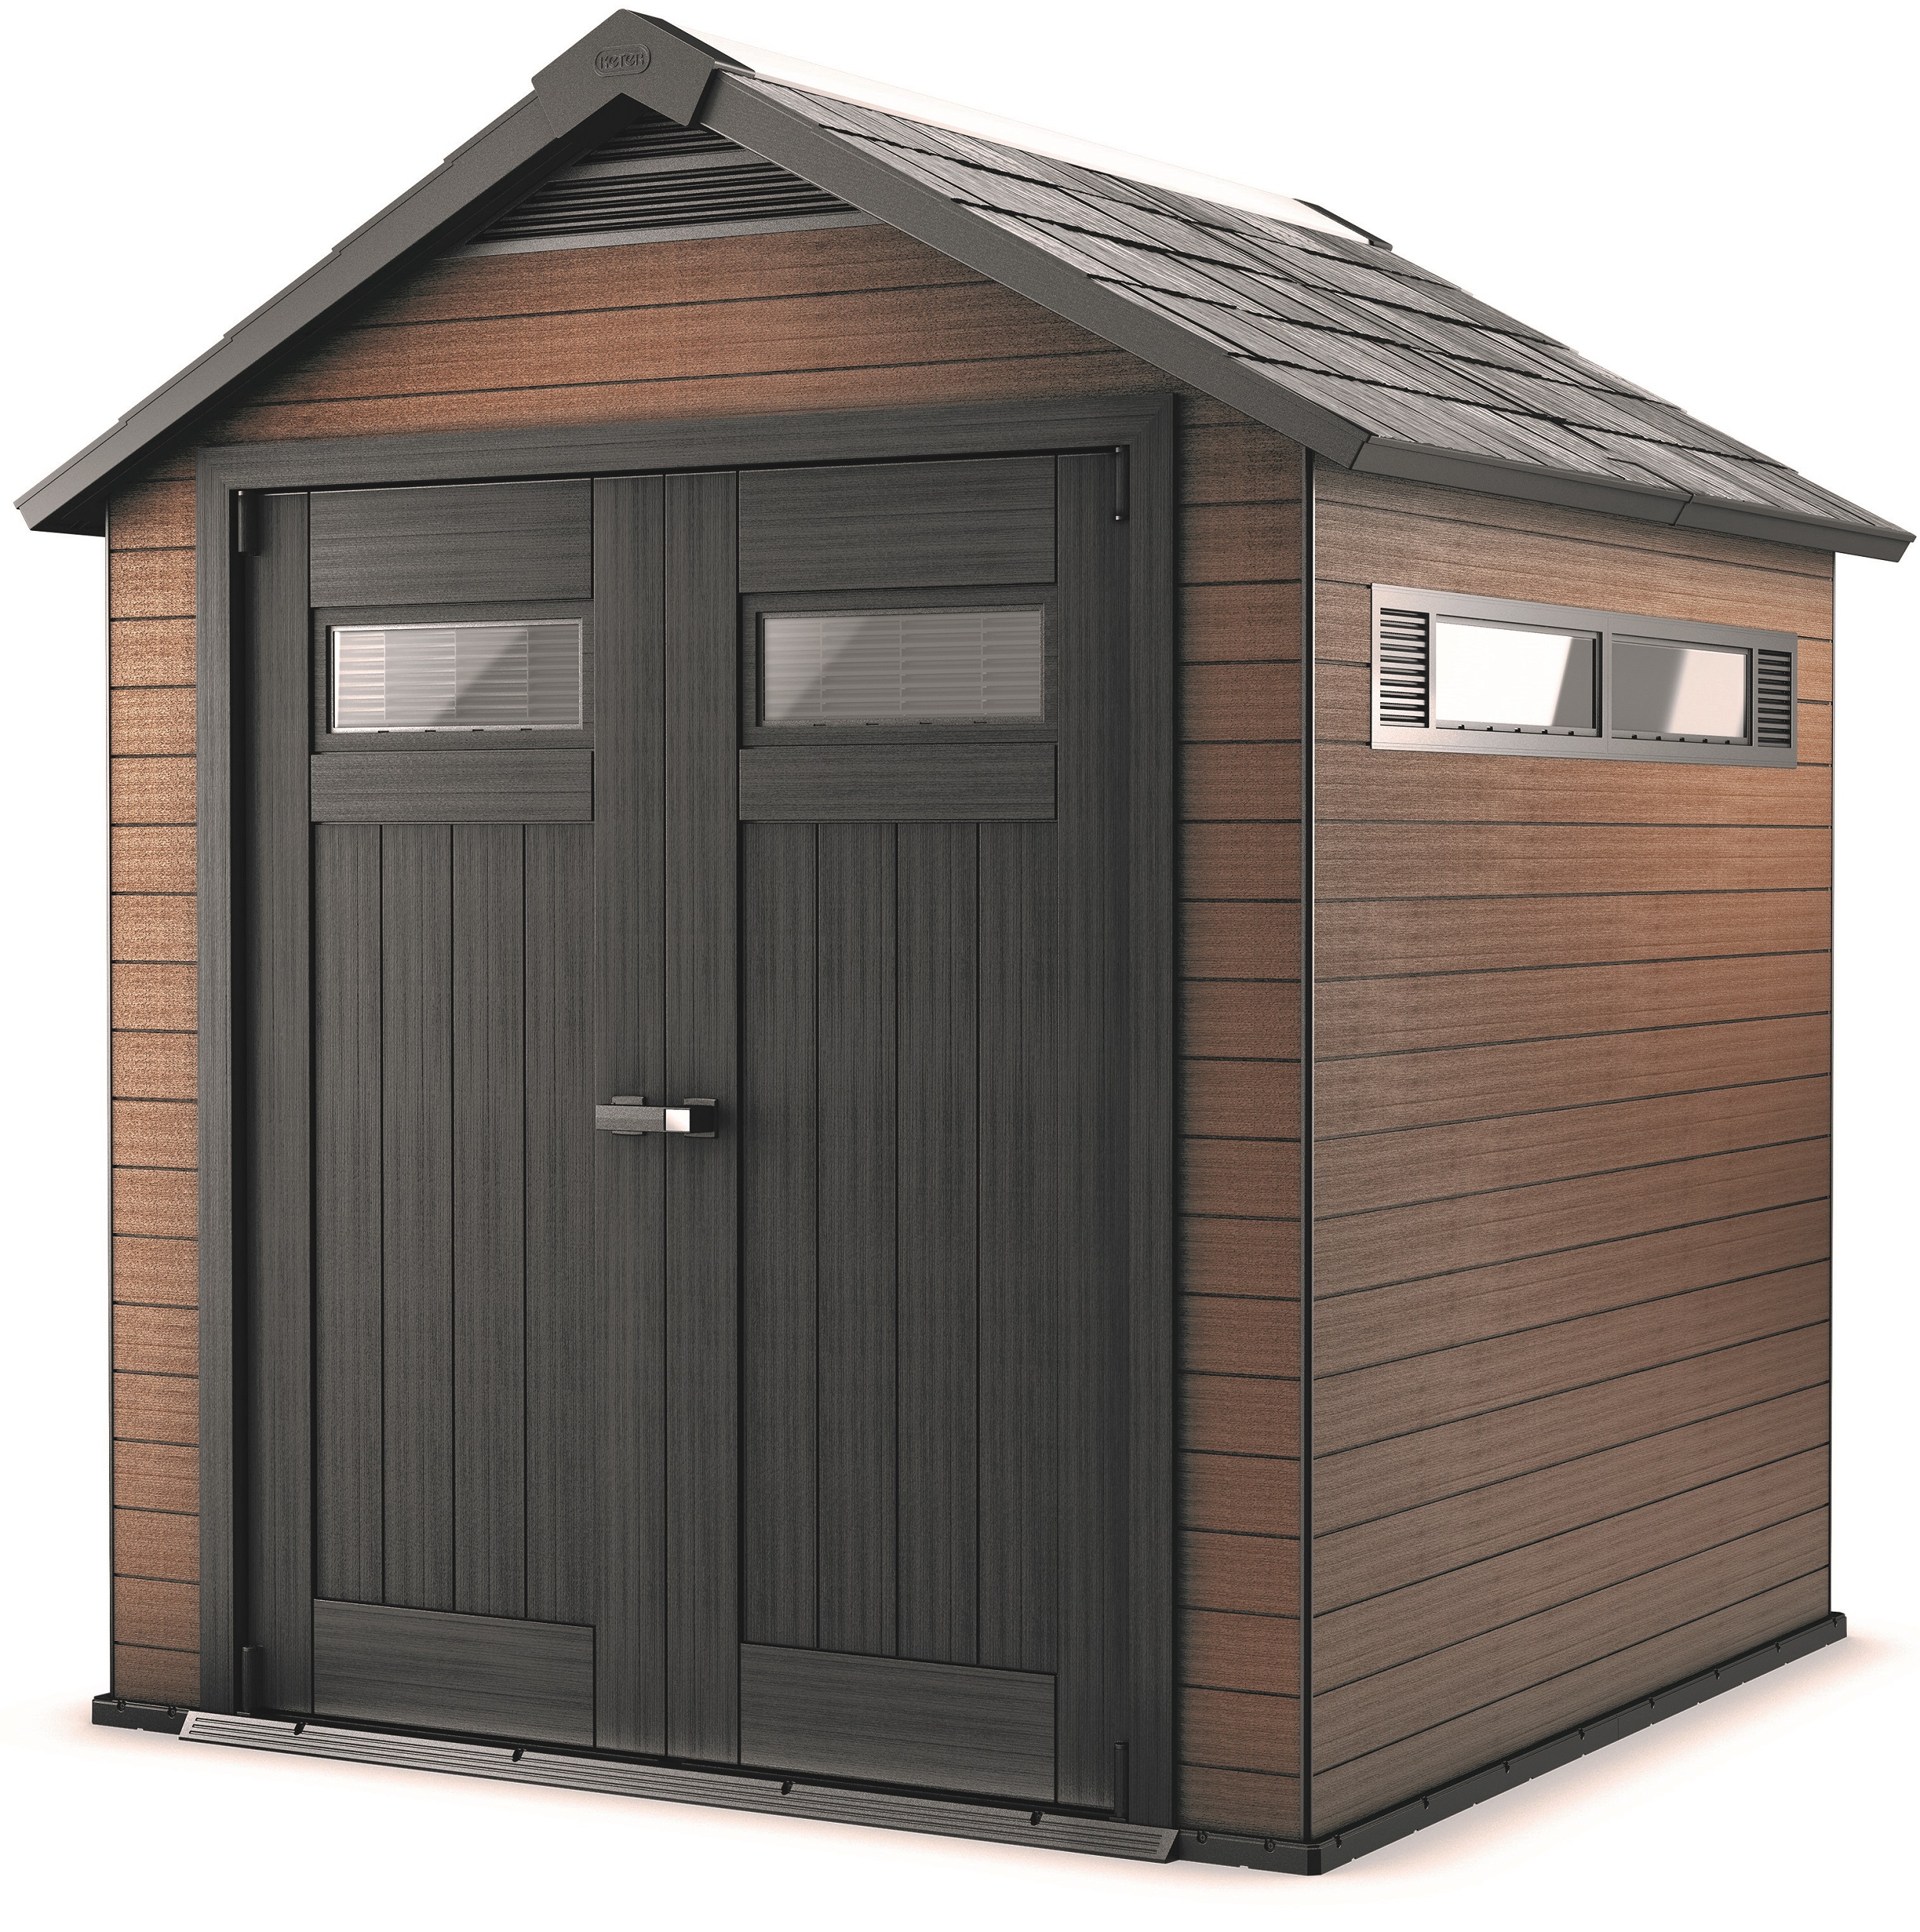 Keter 17199845 7.5' x 7' Wood &amp; Plastic Composite Shed